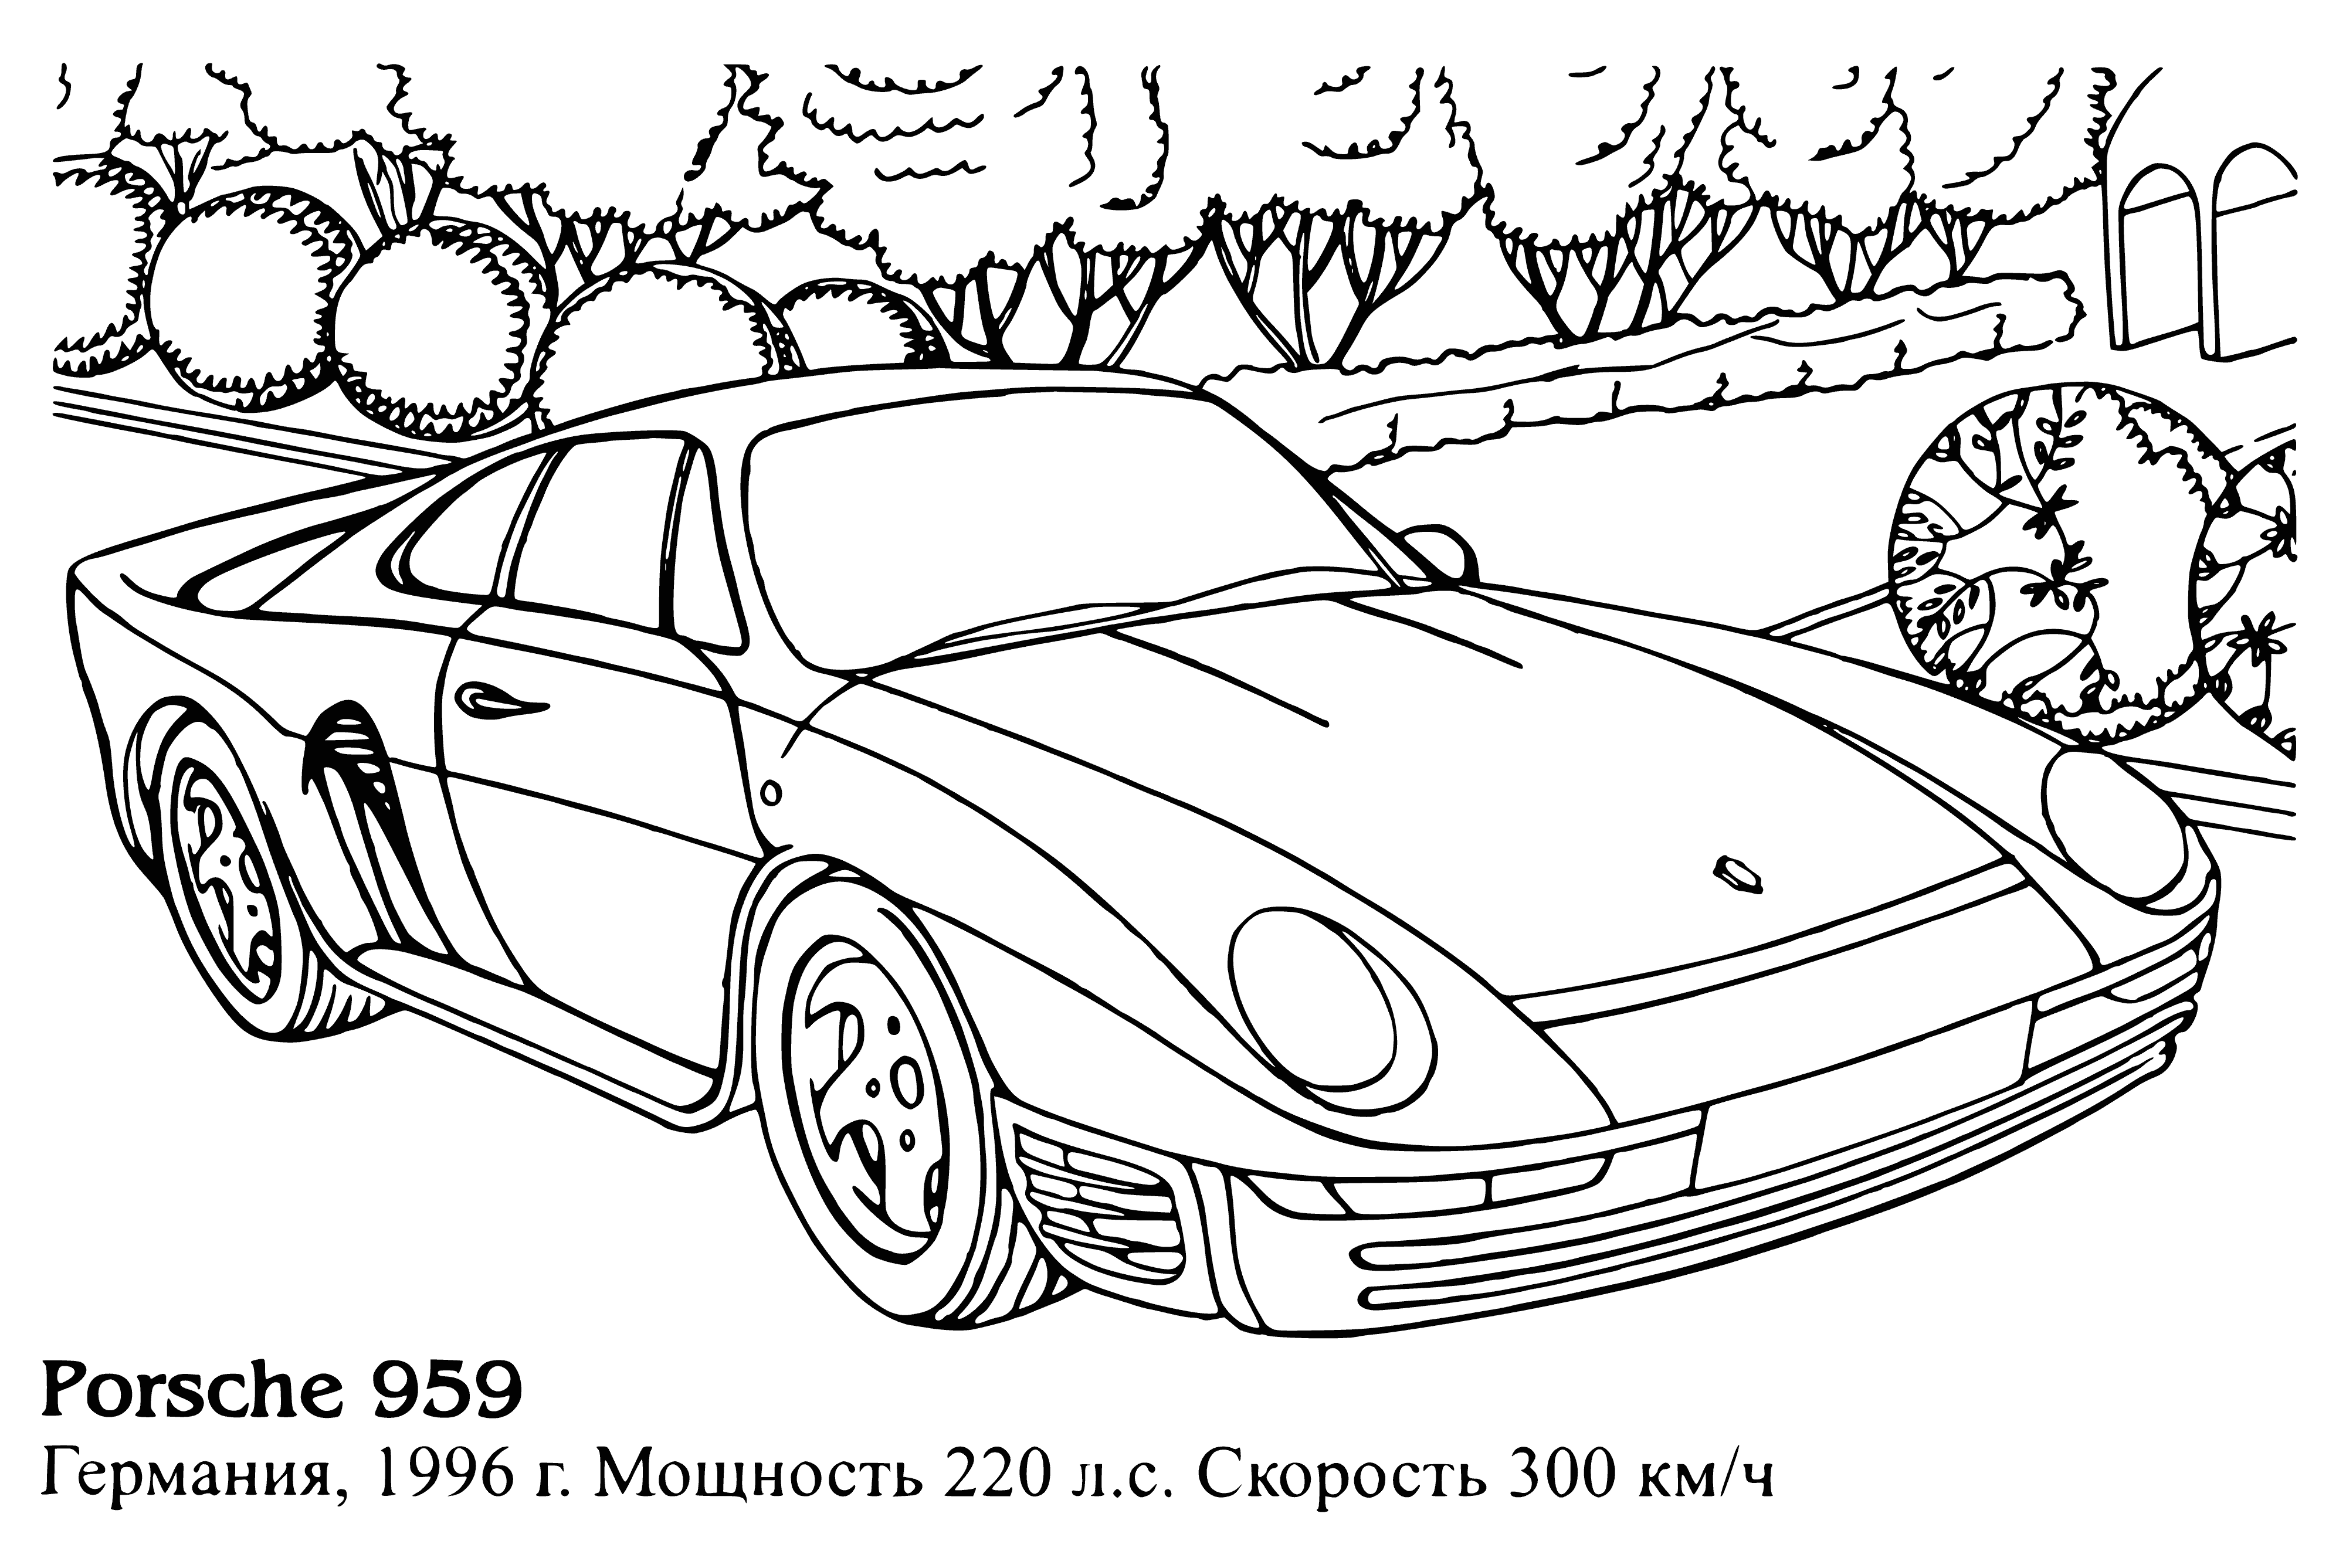 coloring page: A sleek Porsche 959 with red body and black/white stripes. Spoilers and Porsche logo make it a classic. Sitting on a black/white checkered floor.